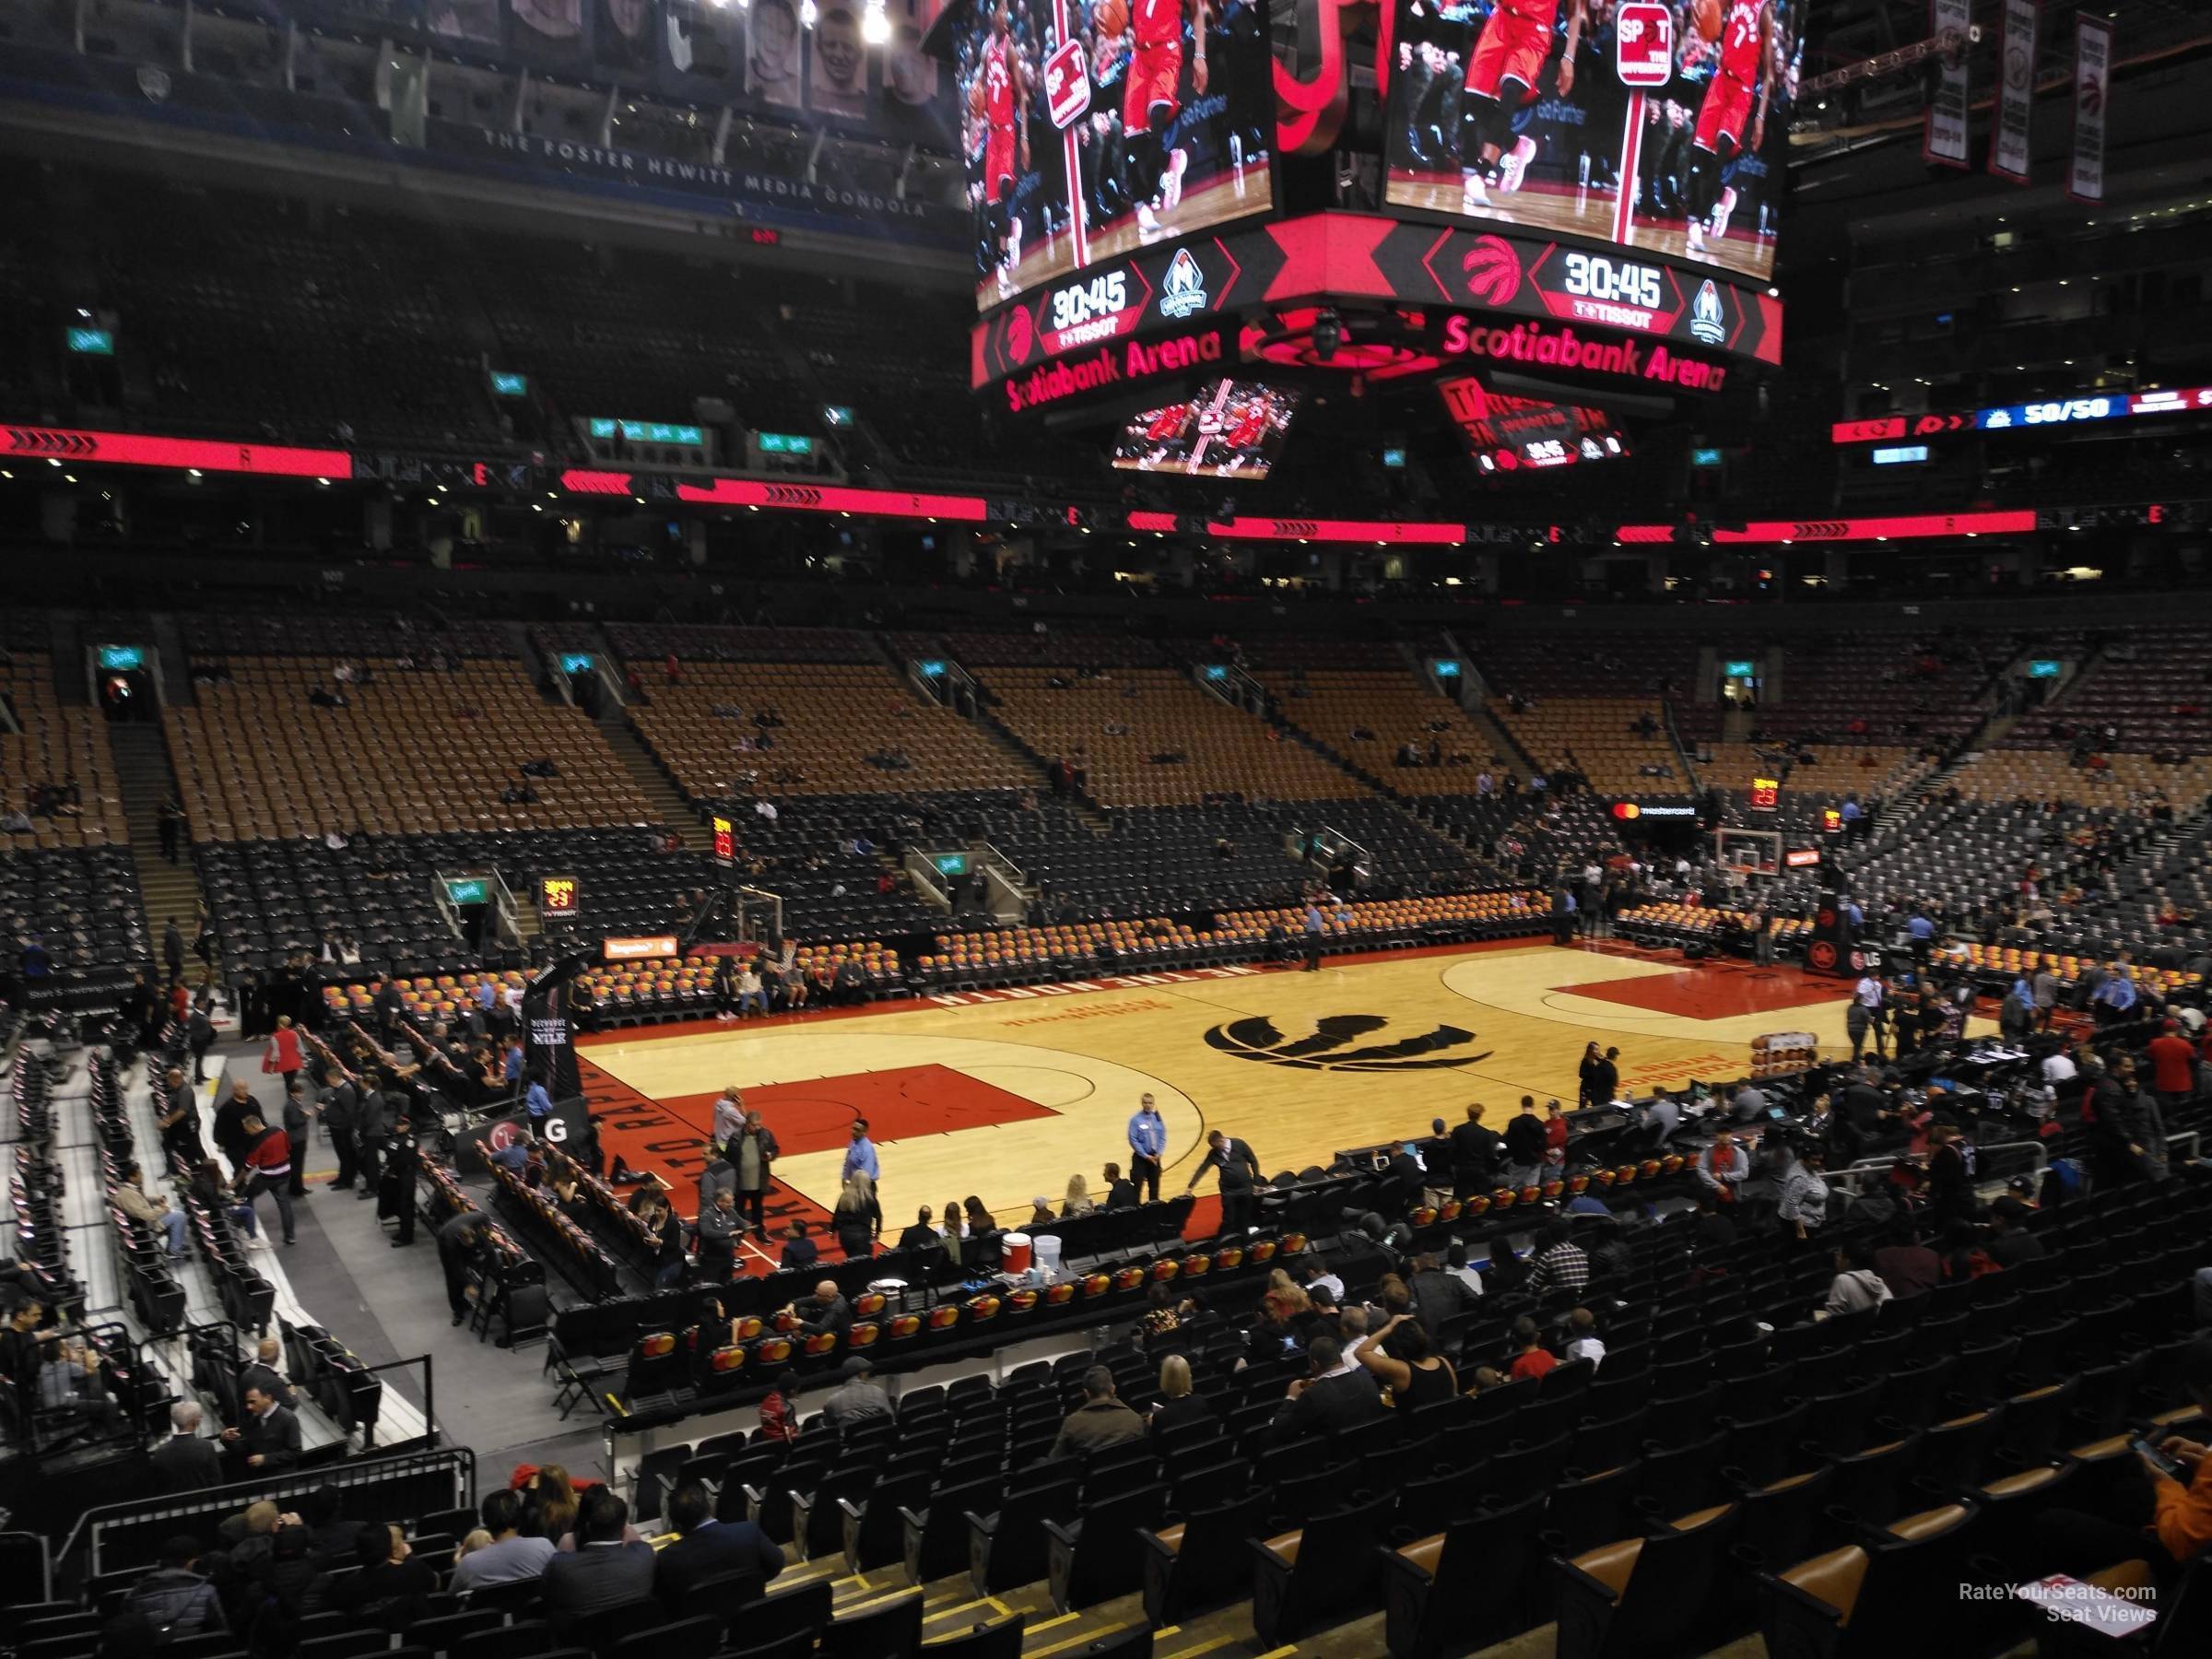 section 121, row 28 seat view  for basketball - scotiabank arena